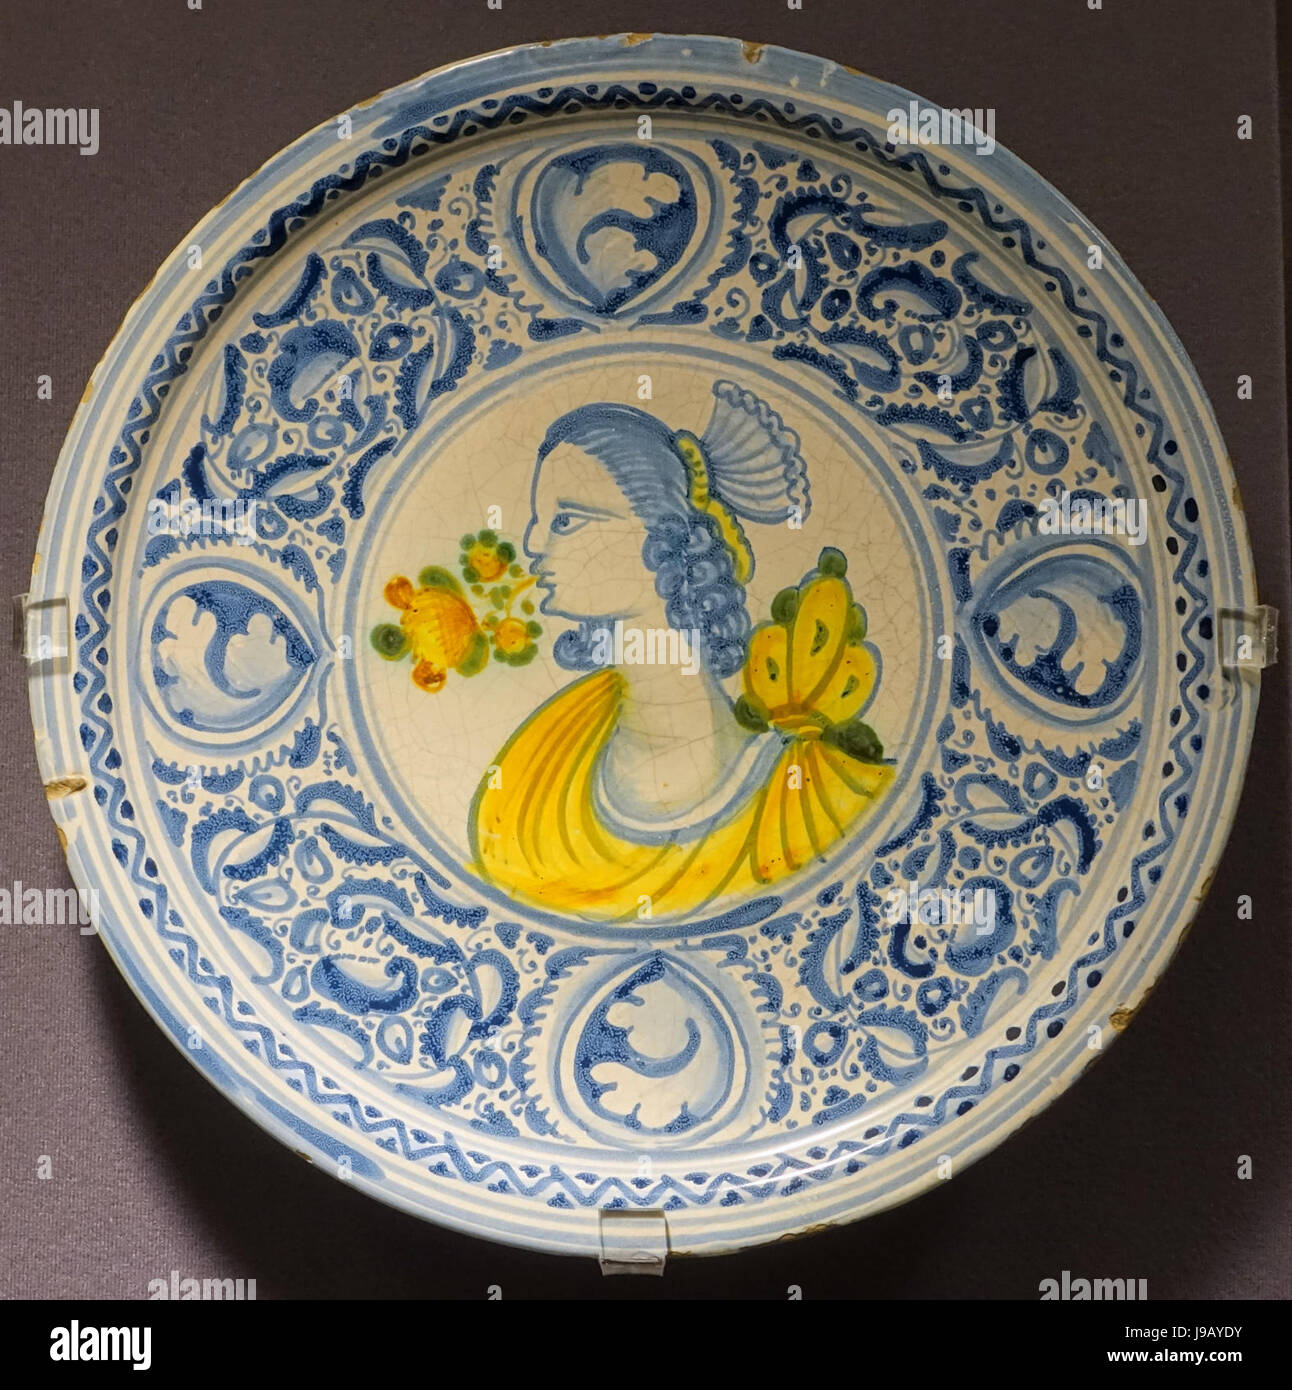 Plate, Italy, Laterza, 1600s, maiolica   Museum of Anthropology, University of British Columbia   DSC08961 Stock Photo